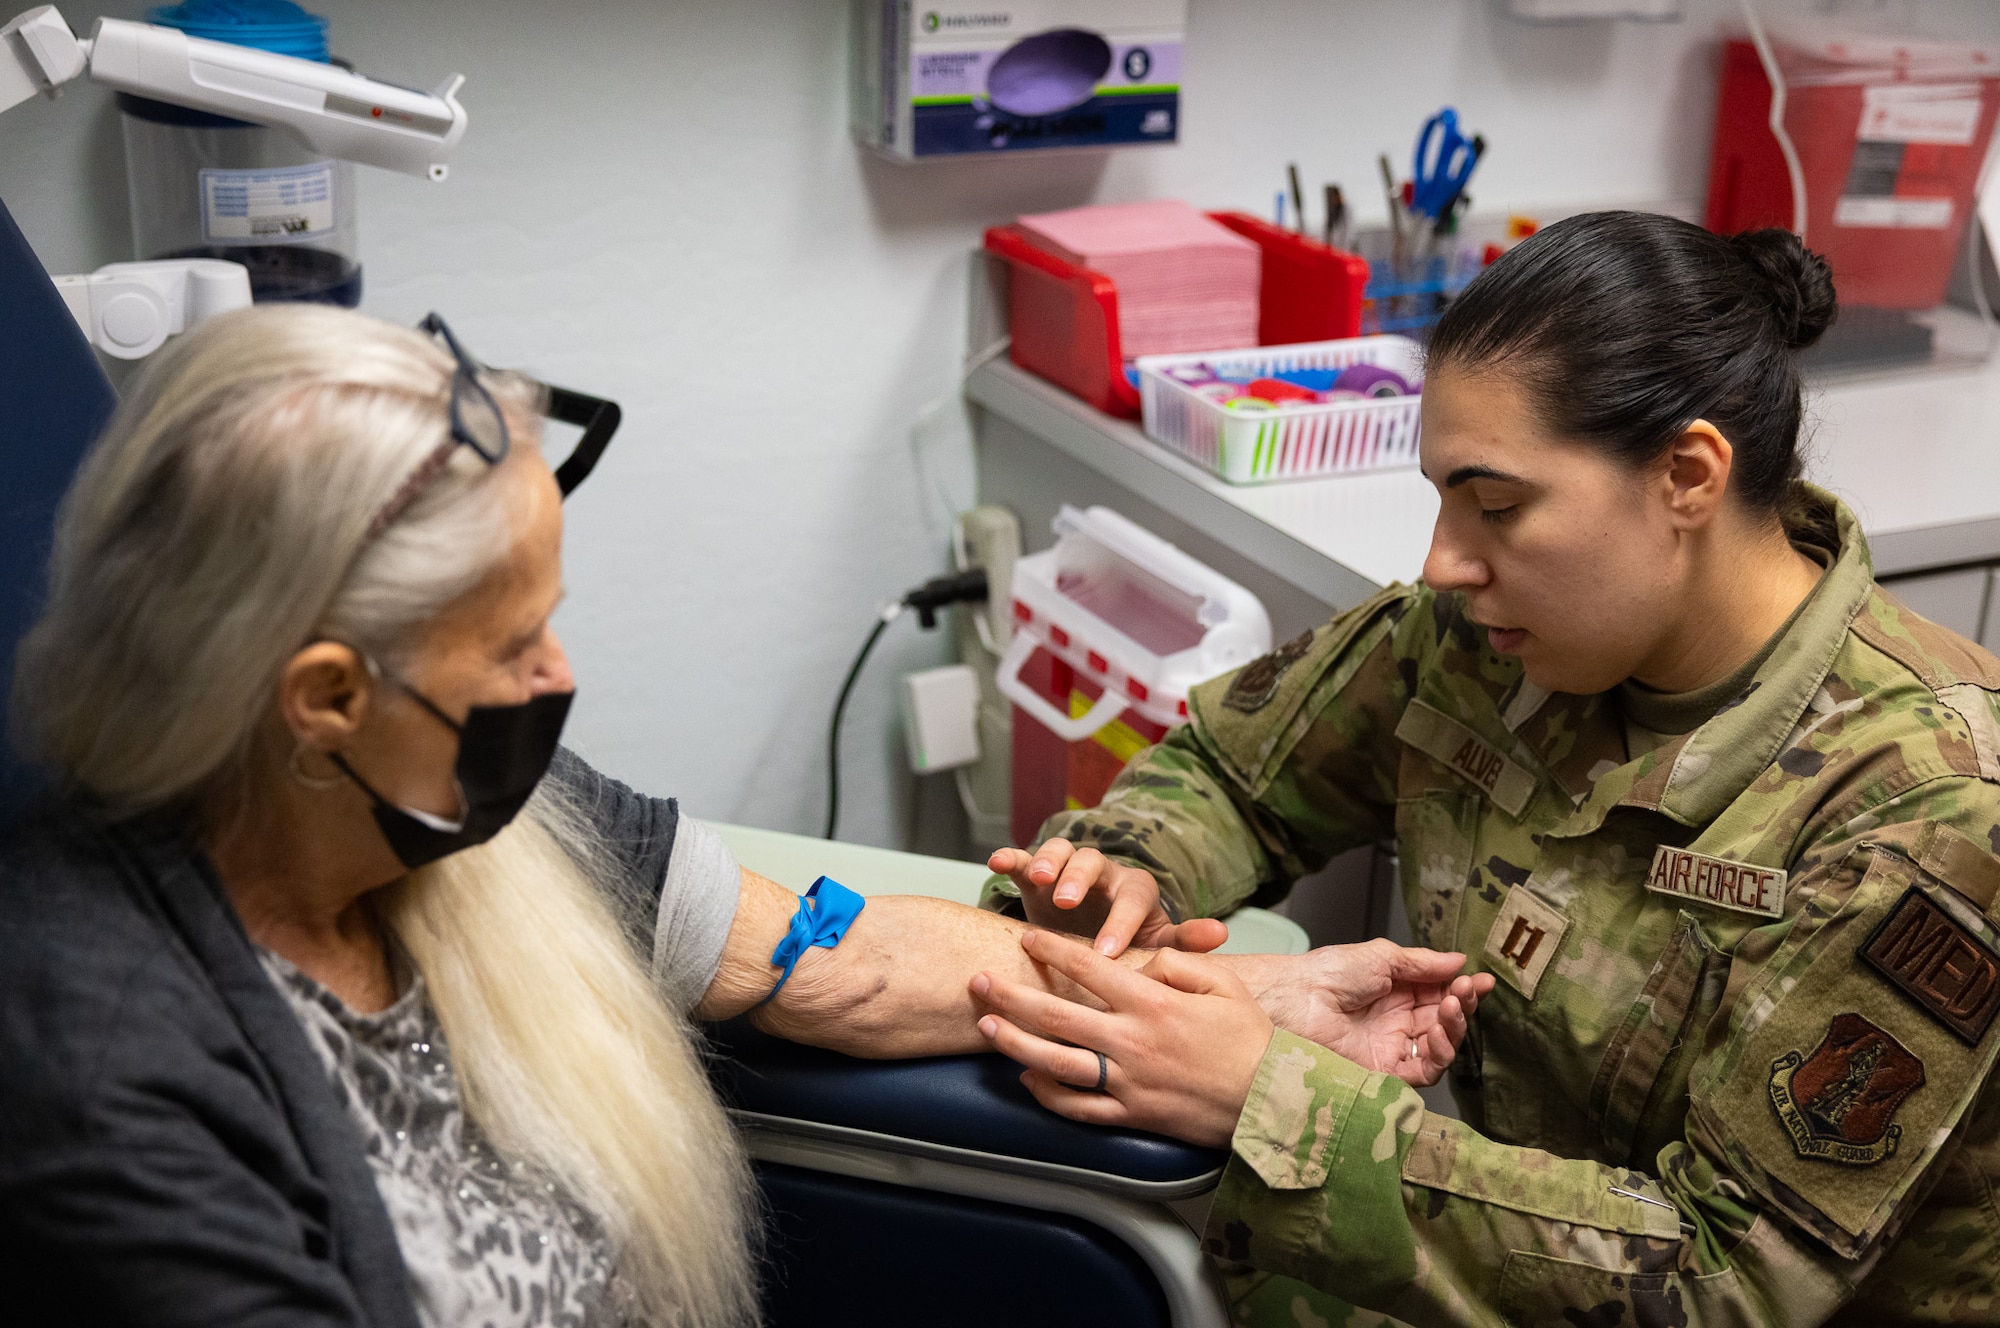 U.S. Air Force Capt. Jessica Alves, a medical specialist assigned to the 109th Airlift Wing, New York Air National Guard, works with a patient during an Innovative Readiness Training mission in Covelo, California, June 16, 2023. IRT missions offer no-cost medical care to U.S. communities while providing hands-on experience to service members.